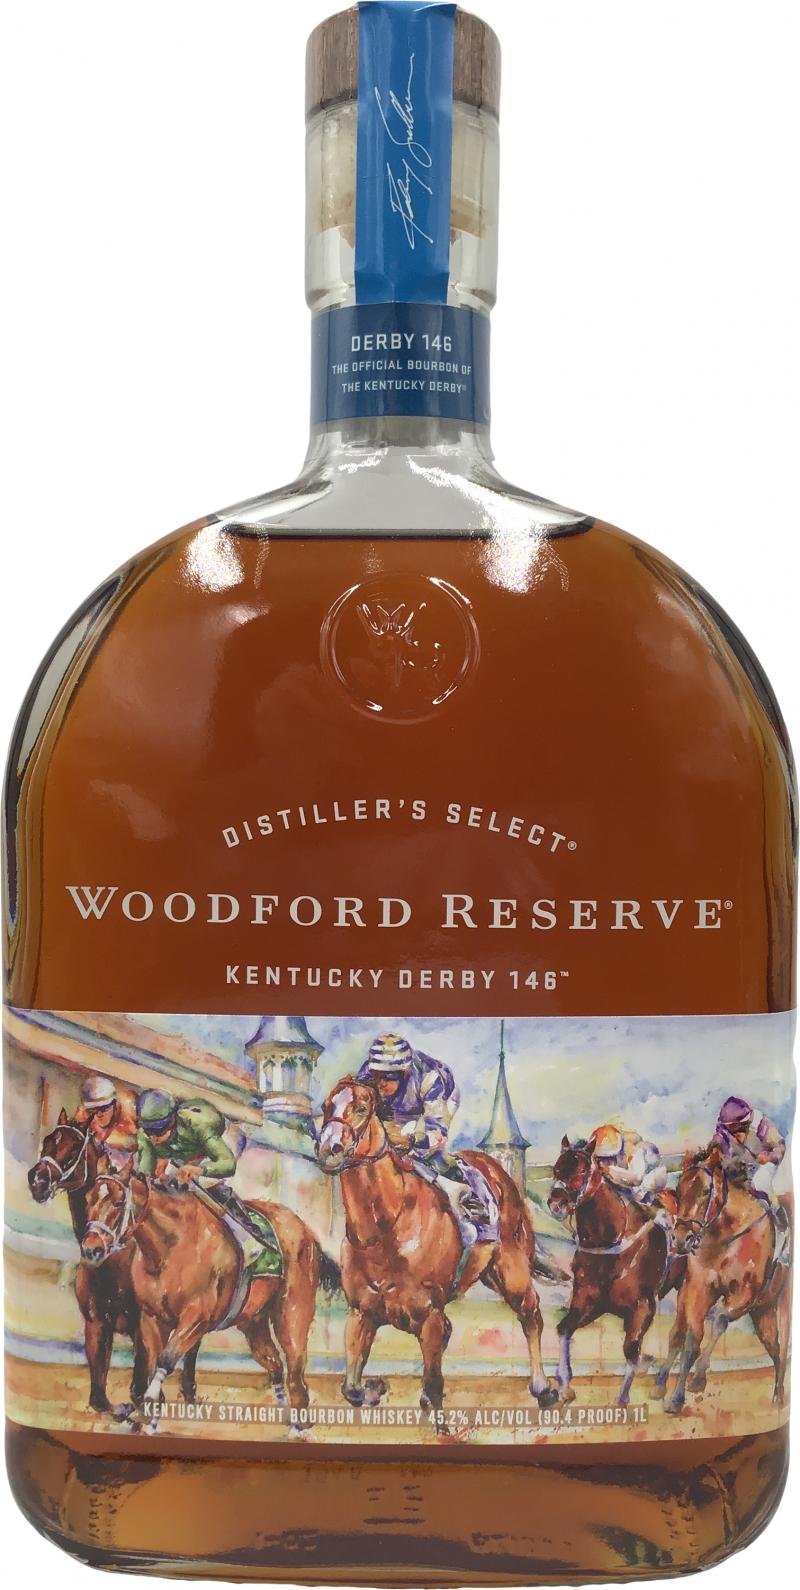 Woodford Reserve Kentucky Derby 146 Value and price information